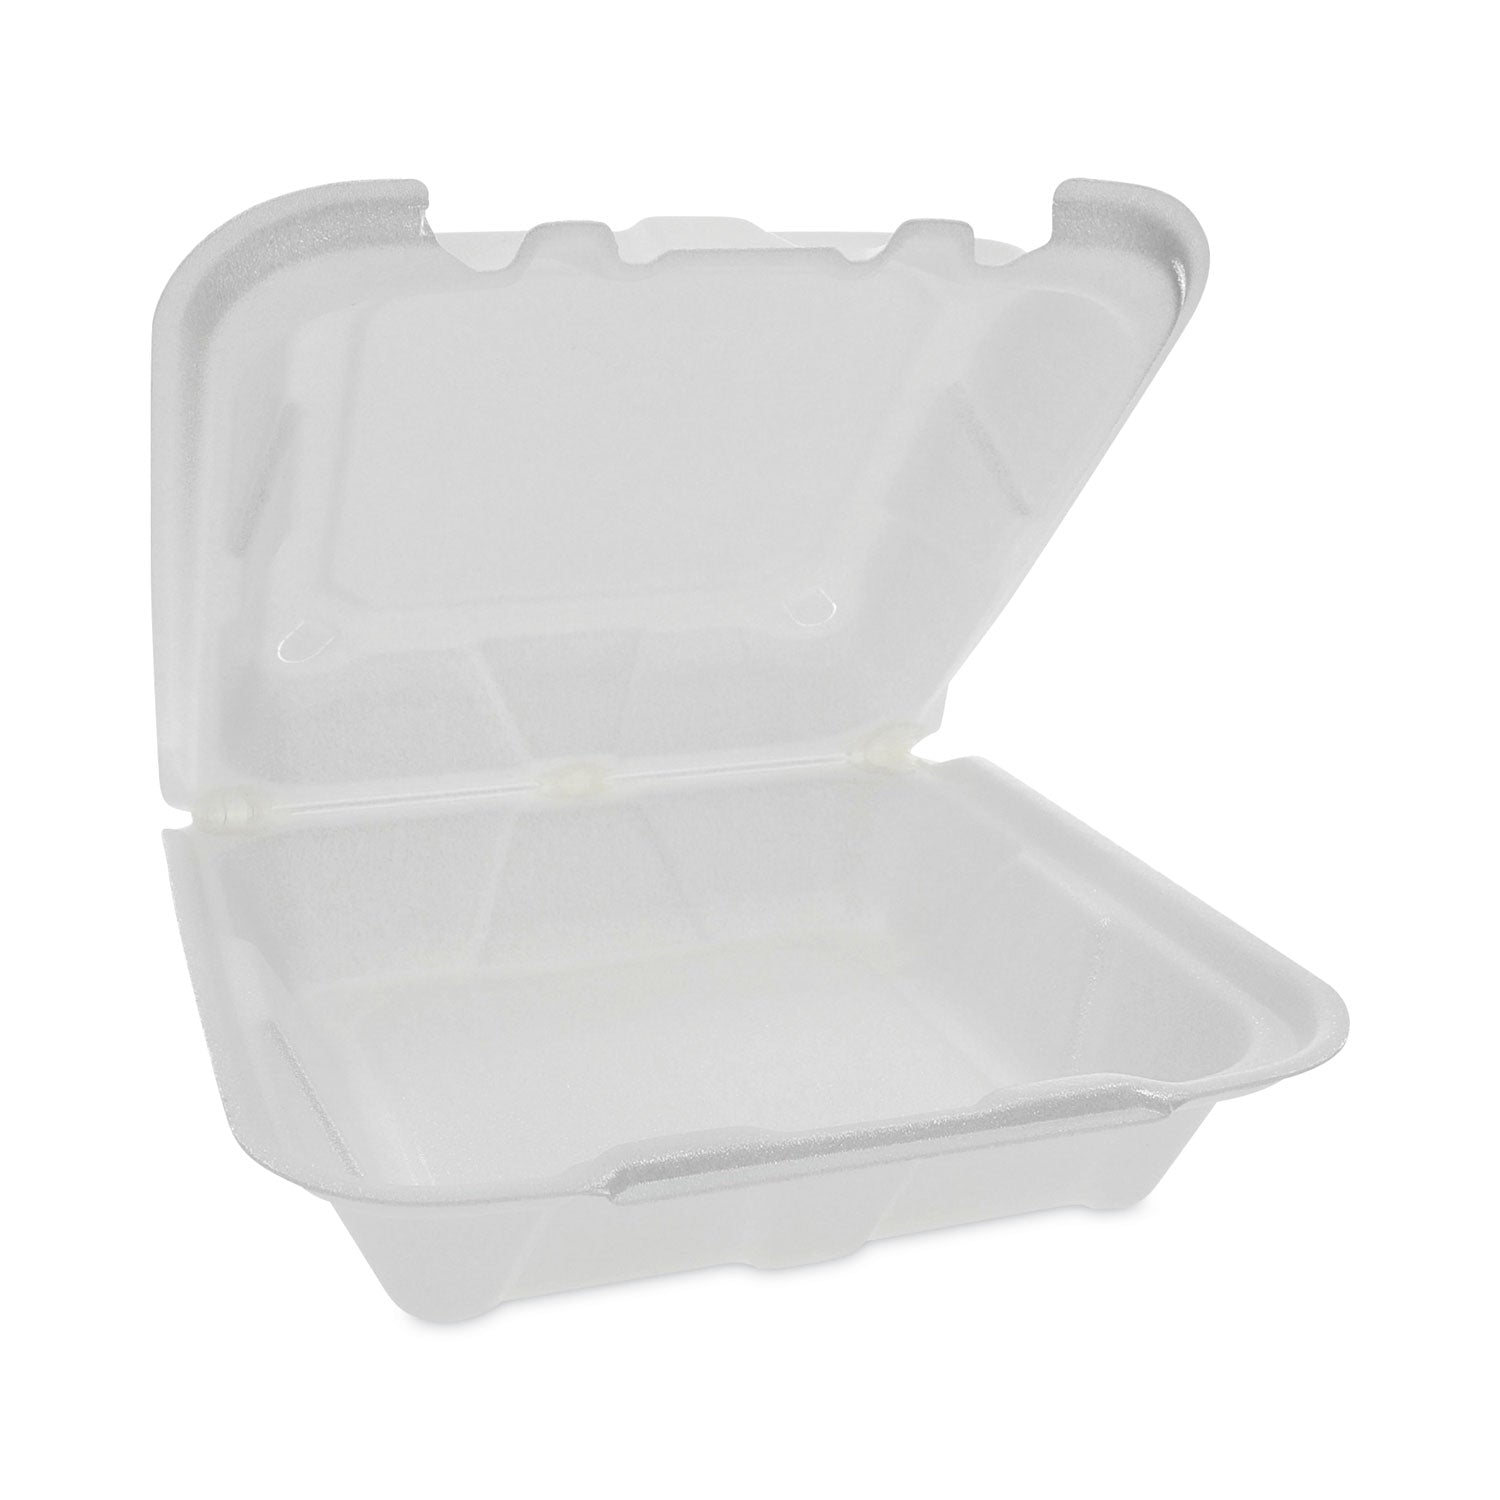 vented-foam-hinged-lid-container-dual-tab-lock-842-x-815-x-3-white-150-carton_pctytd188010000 - 2